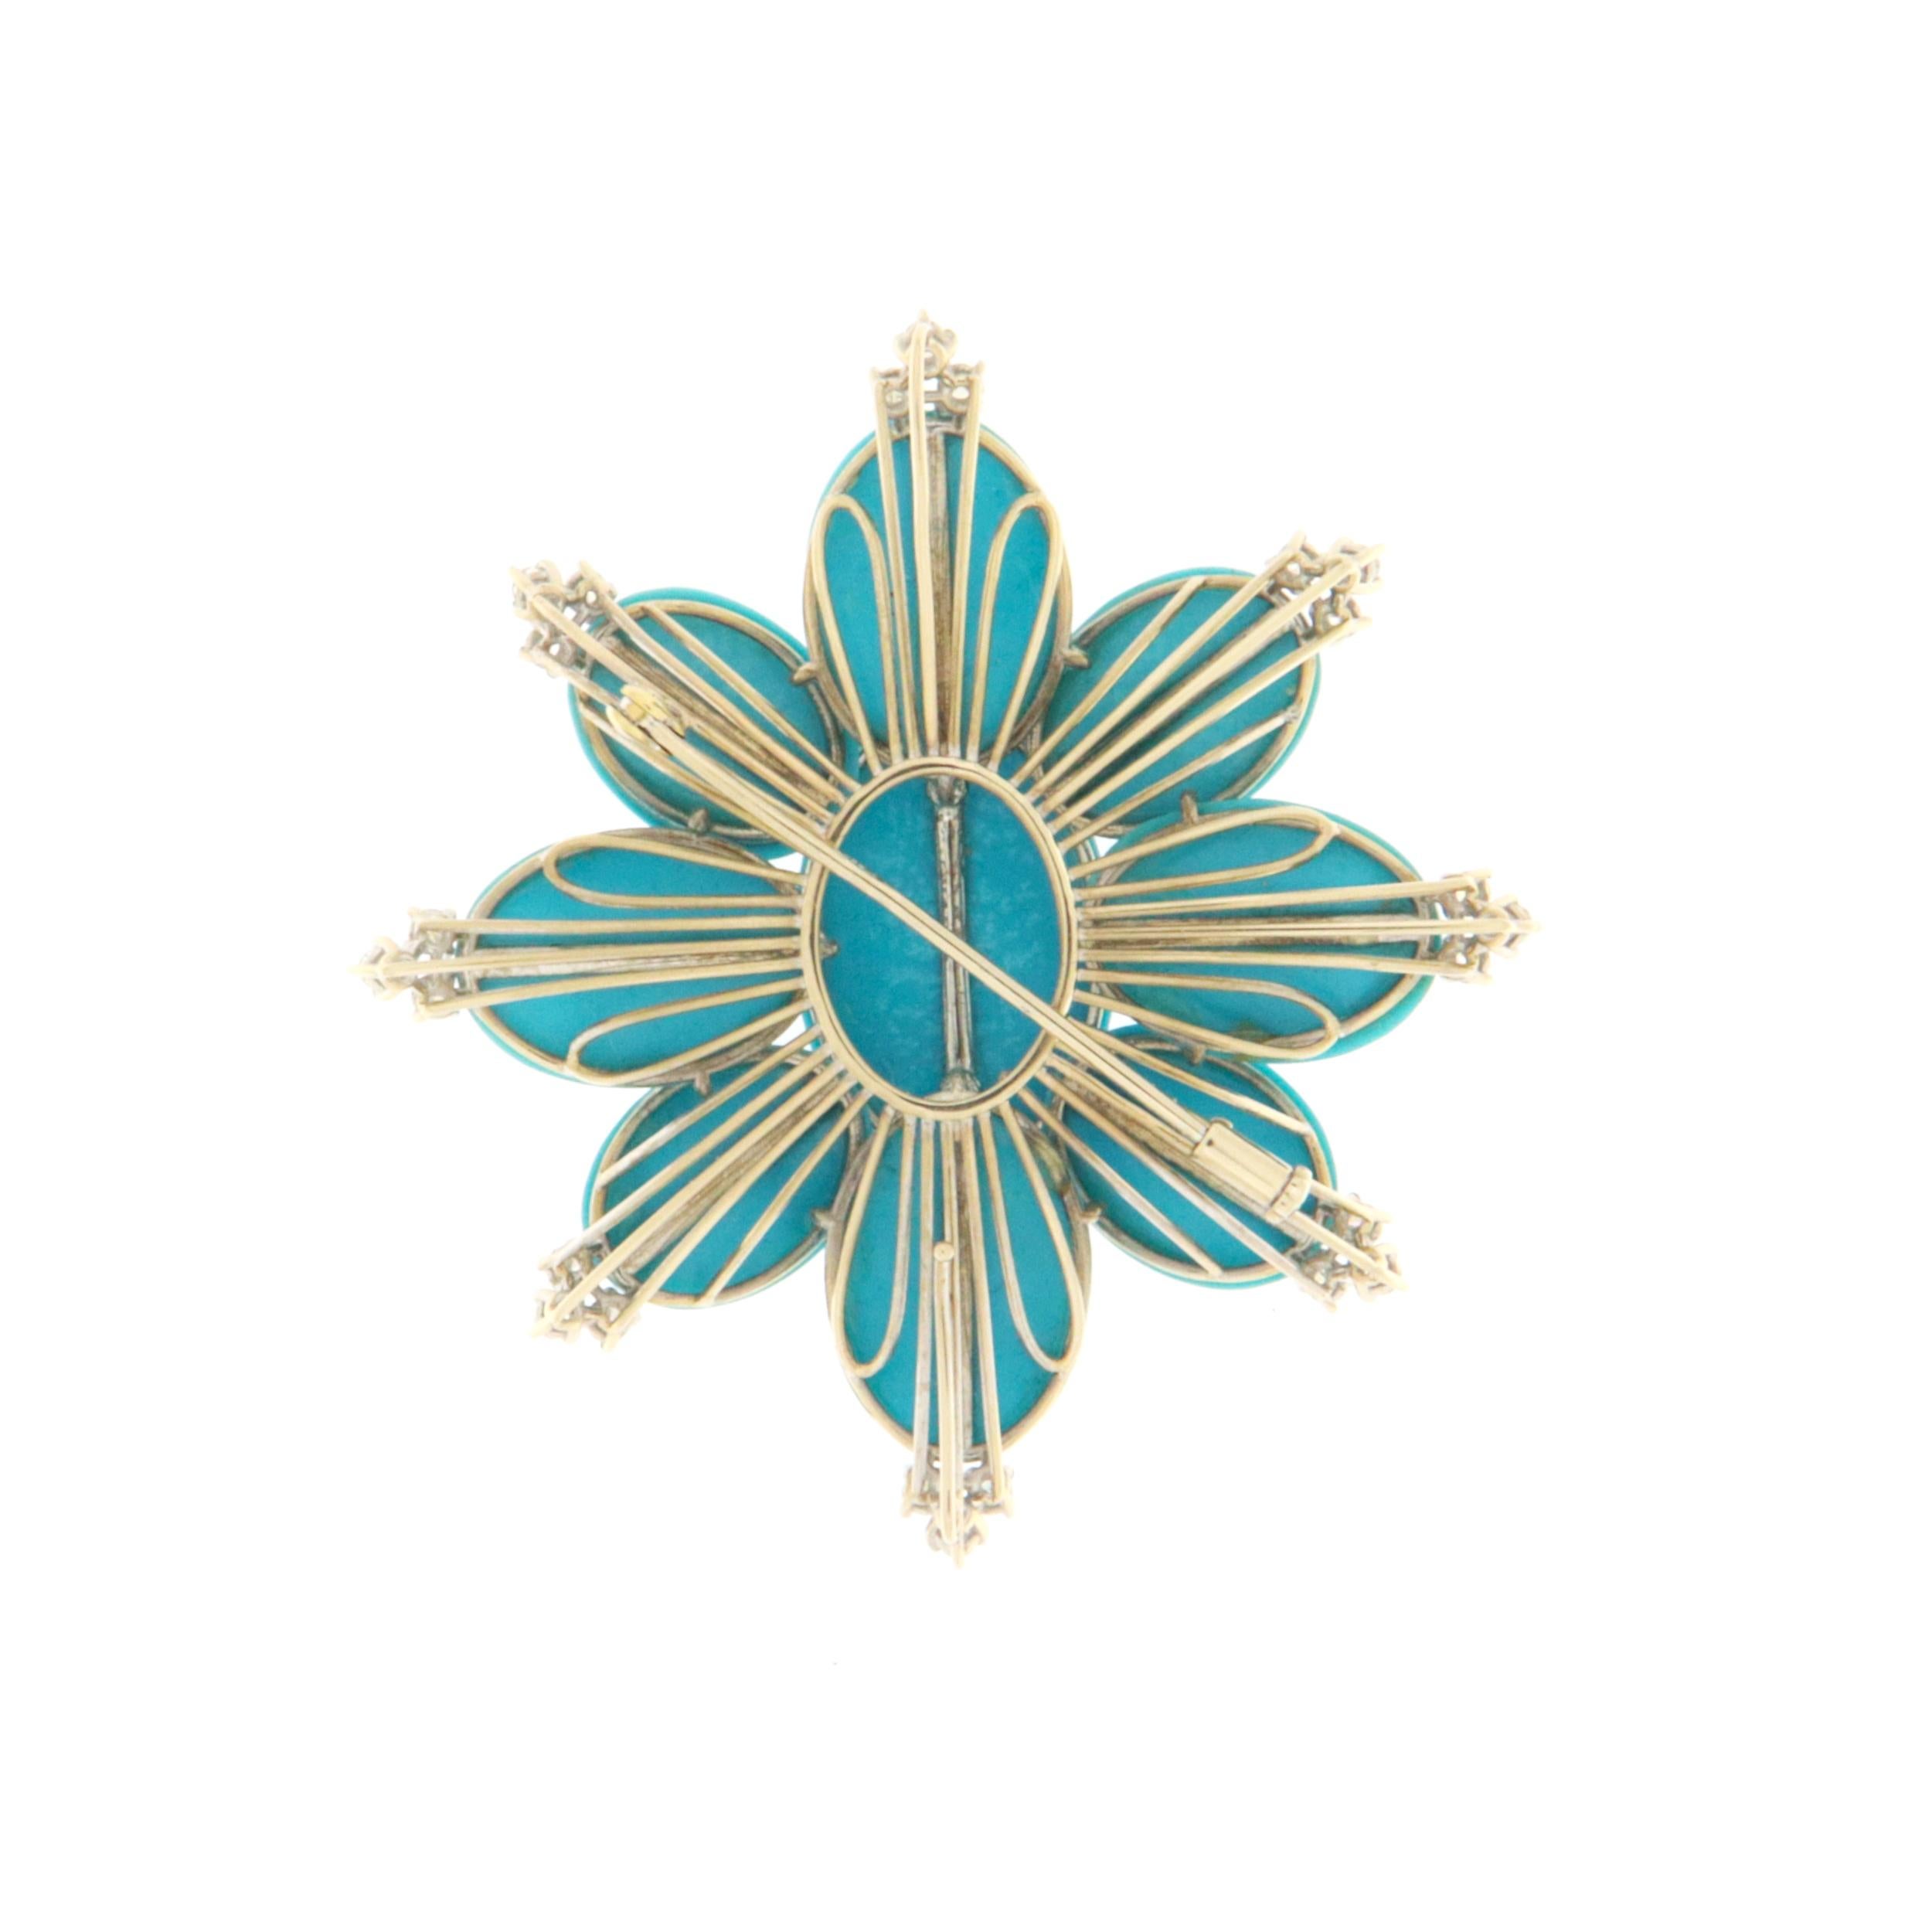 Splendid brooch designed first and then handcrafted by expert artisans in the sector, made of 18 karat white gold and set with natural diamonds and turquoise pieces.
For lovers of the genre it is a brooch with a deep visual impact that cannot escape